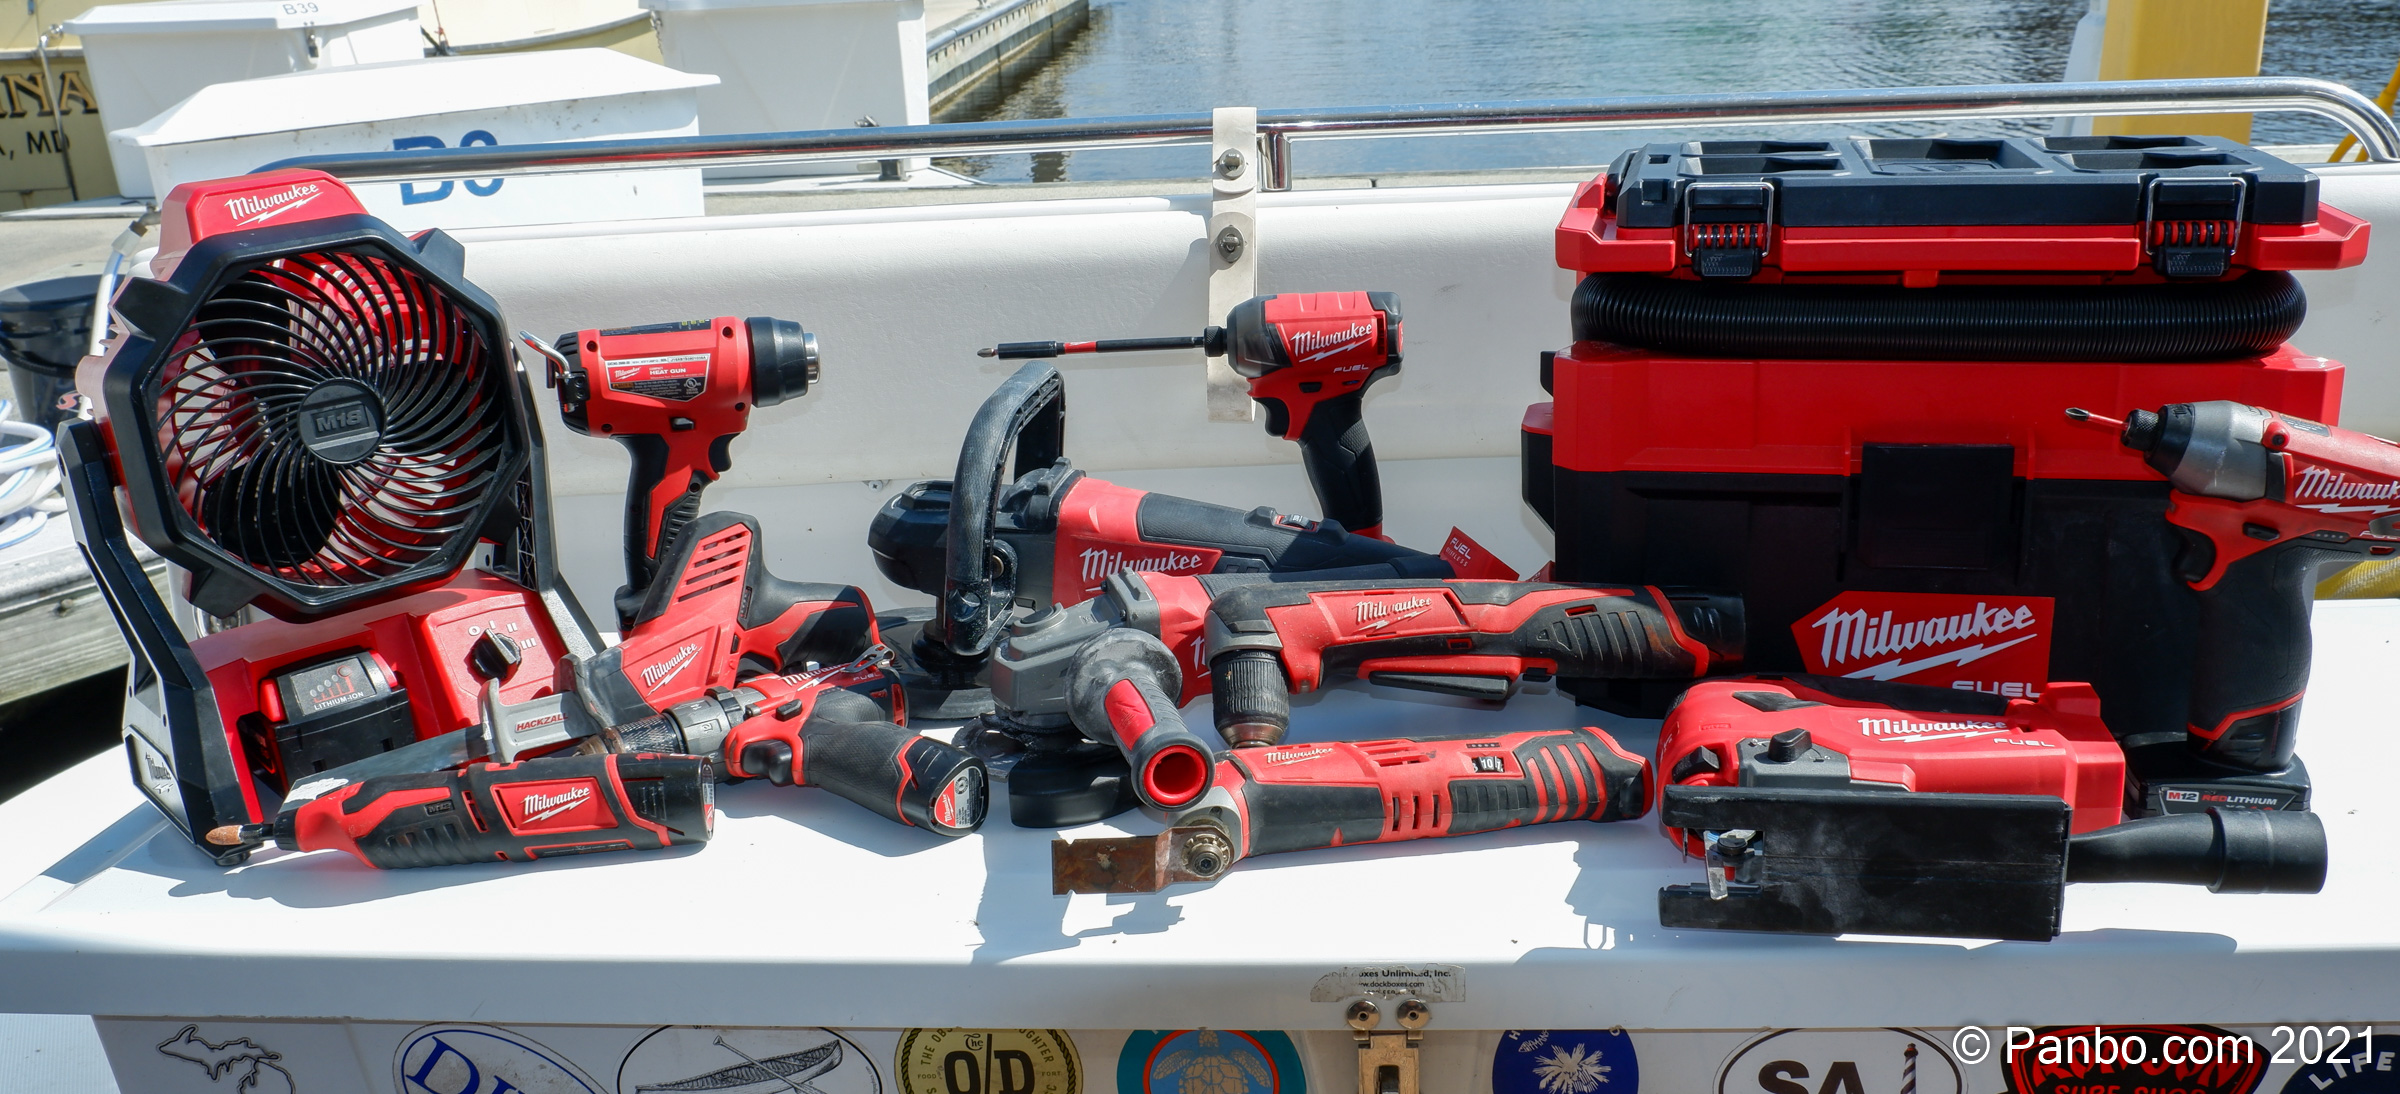 Cordless tools make marine electronics installs easier and faster